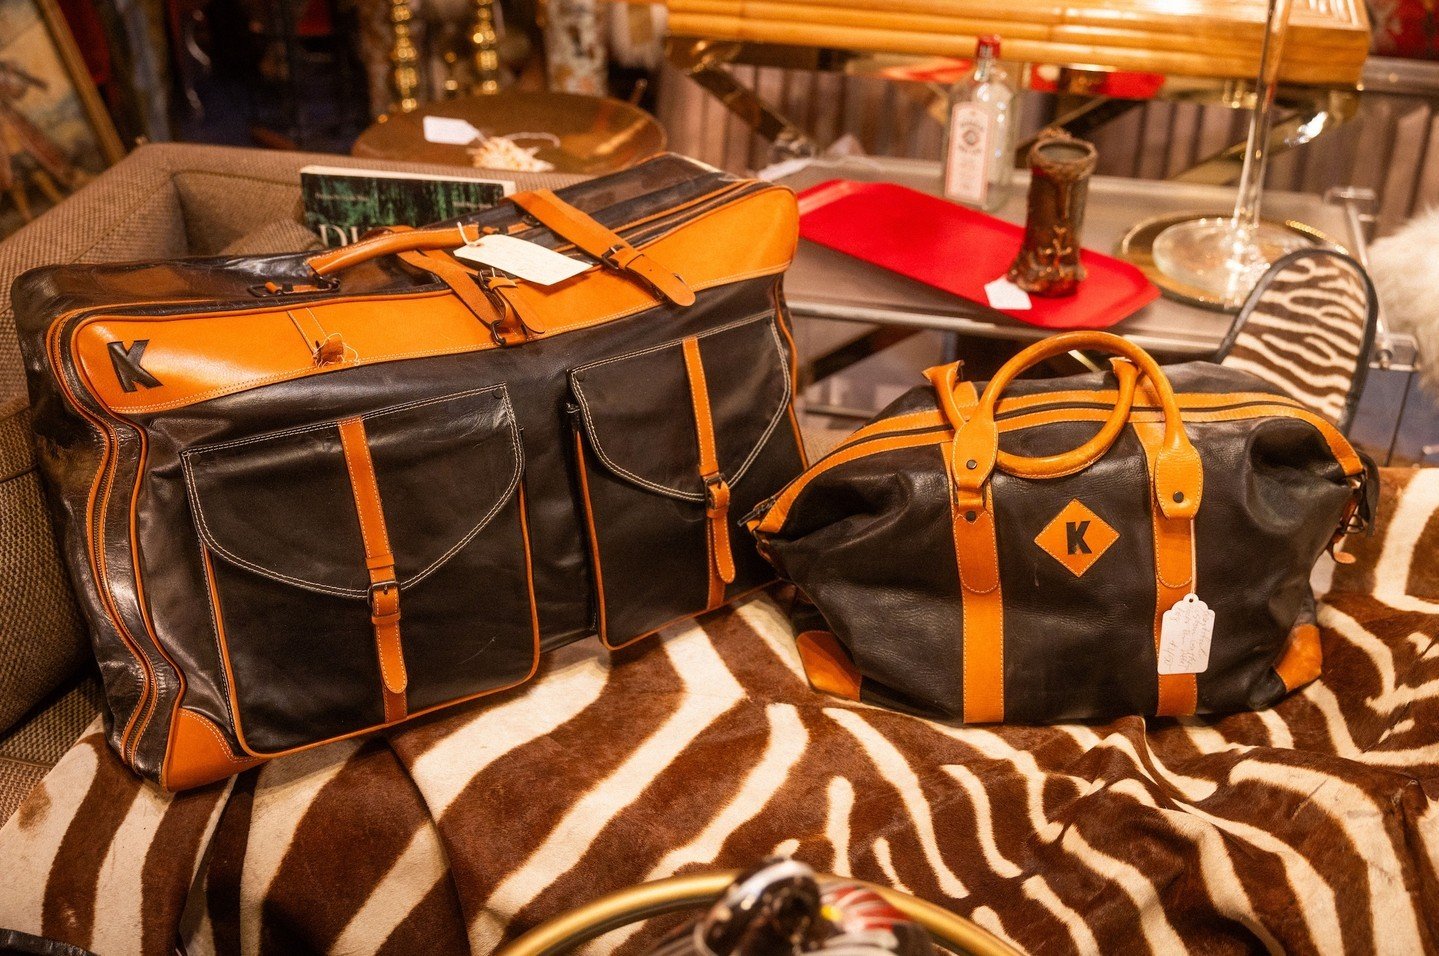 Pack your bags&hellip; it&rsquo;s almost time for #SummerVacation! 😎 👜 This #vintage set makes us want to #travel. ✈️

Is there a trip that you&rsquo;re looking forward to this summer? 👇 #TravelGram #ShopVintage